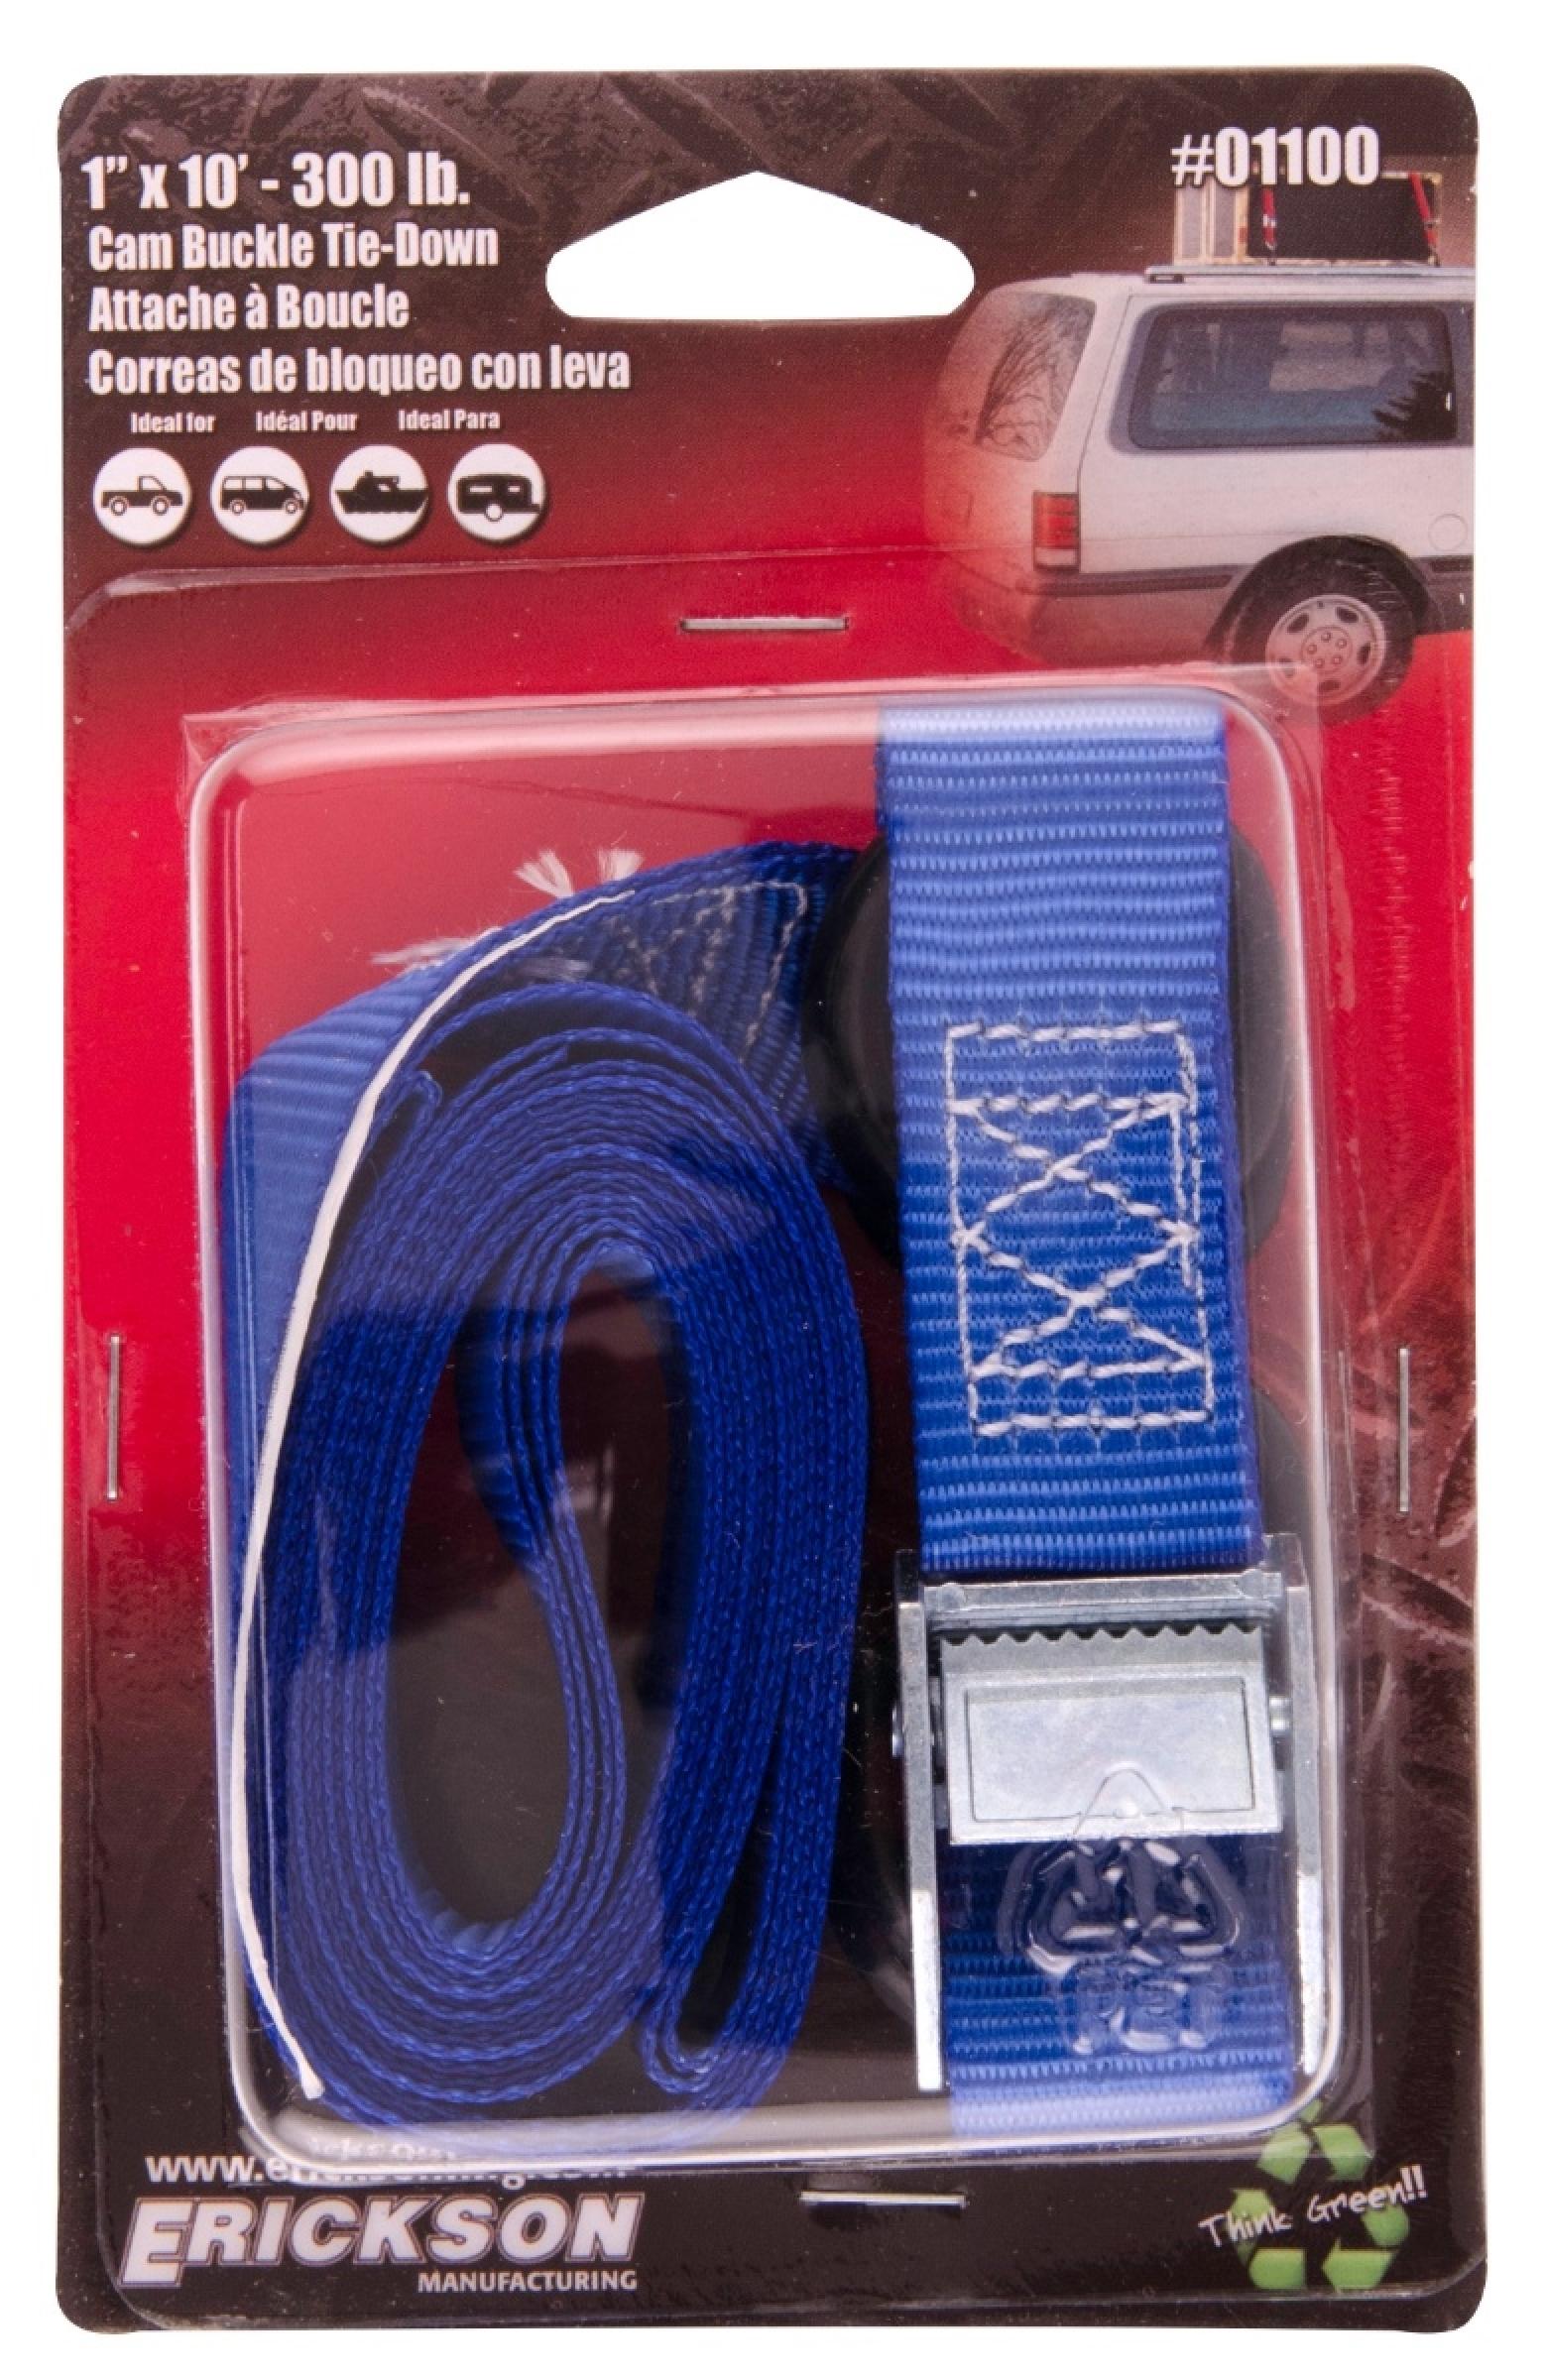 1" x 10' Light Duty Cam Strap 300 lb rated